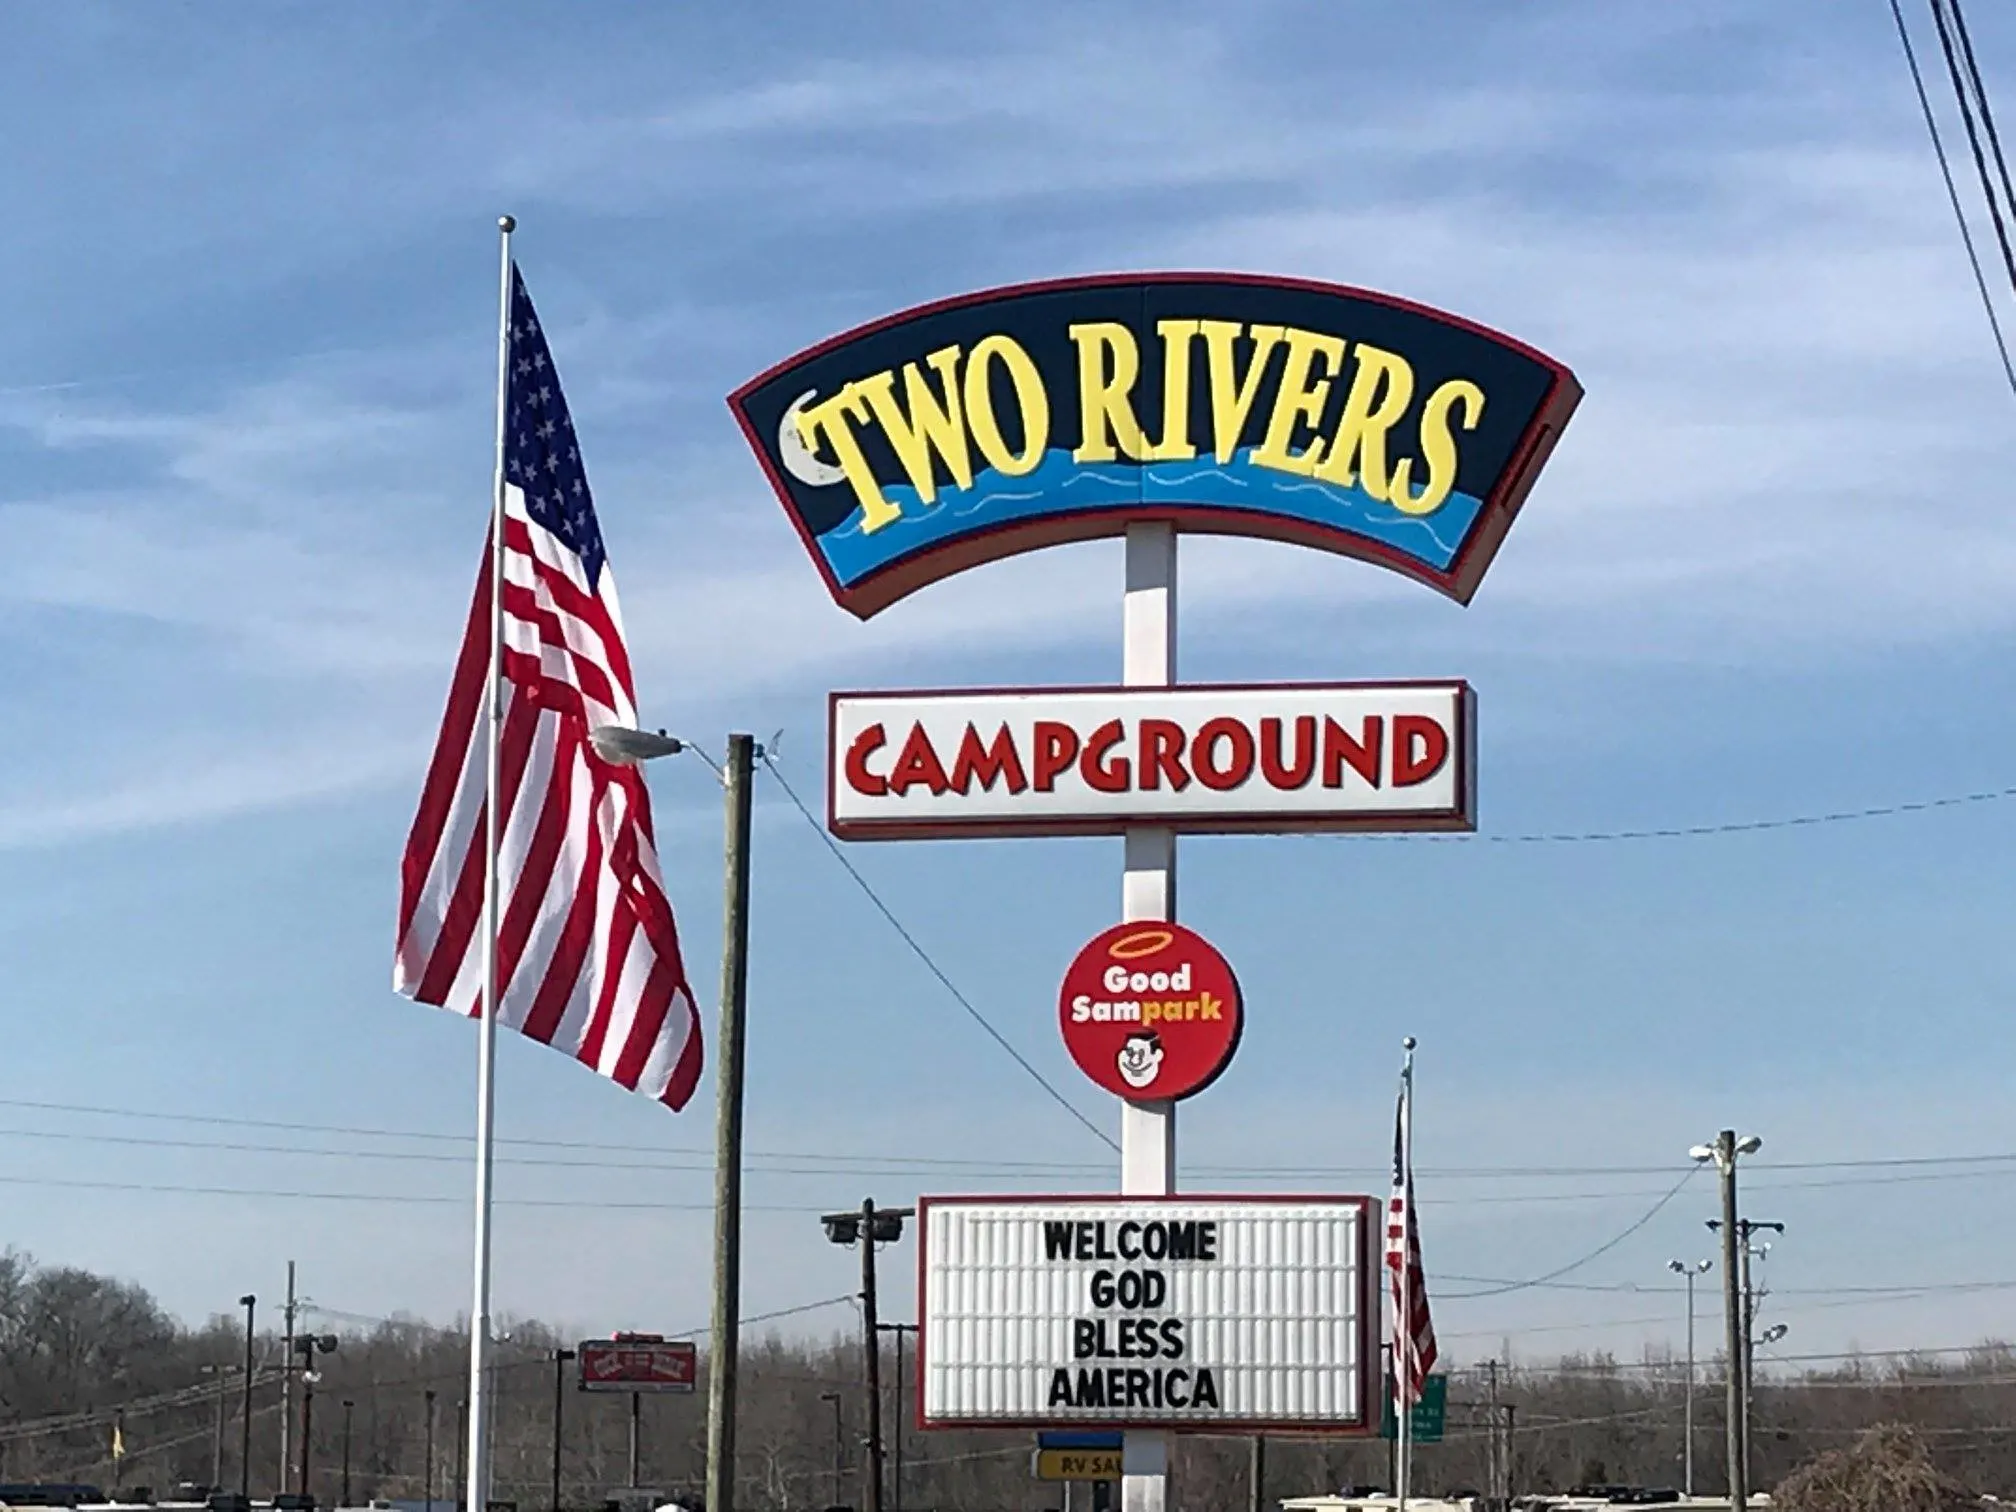 two rivers campground rv park sign with american flag near Nashville tn 